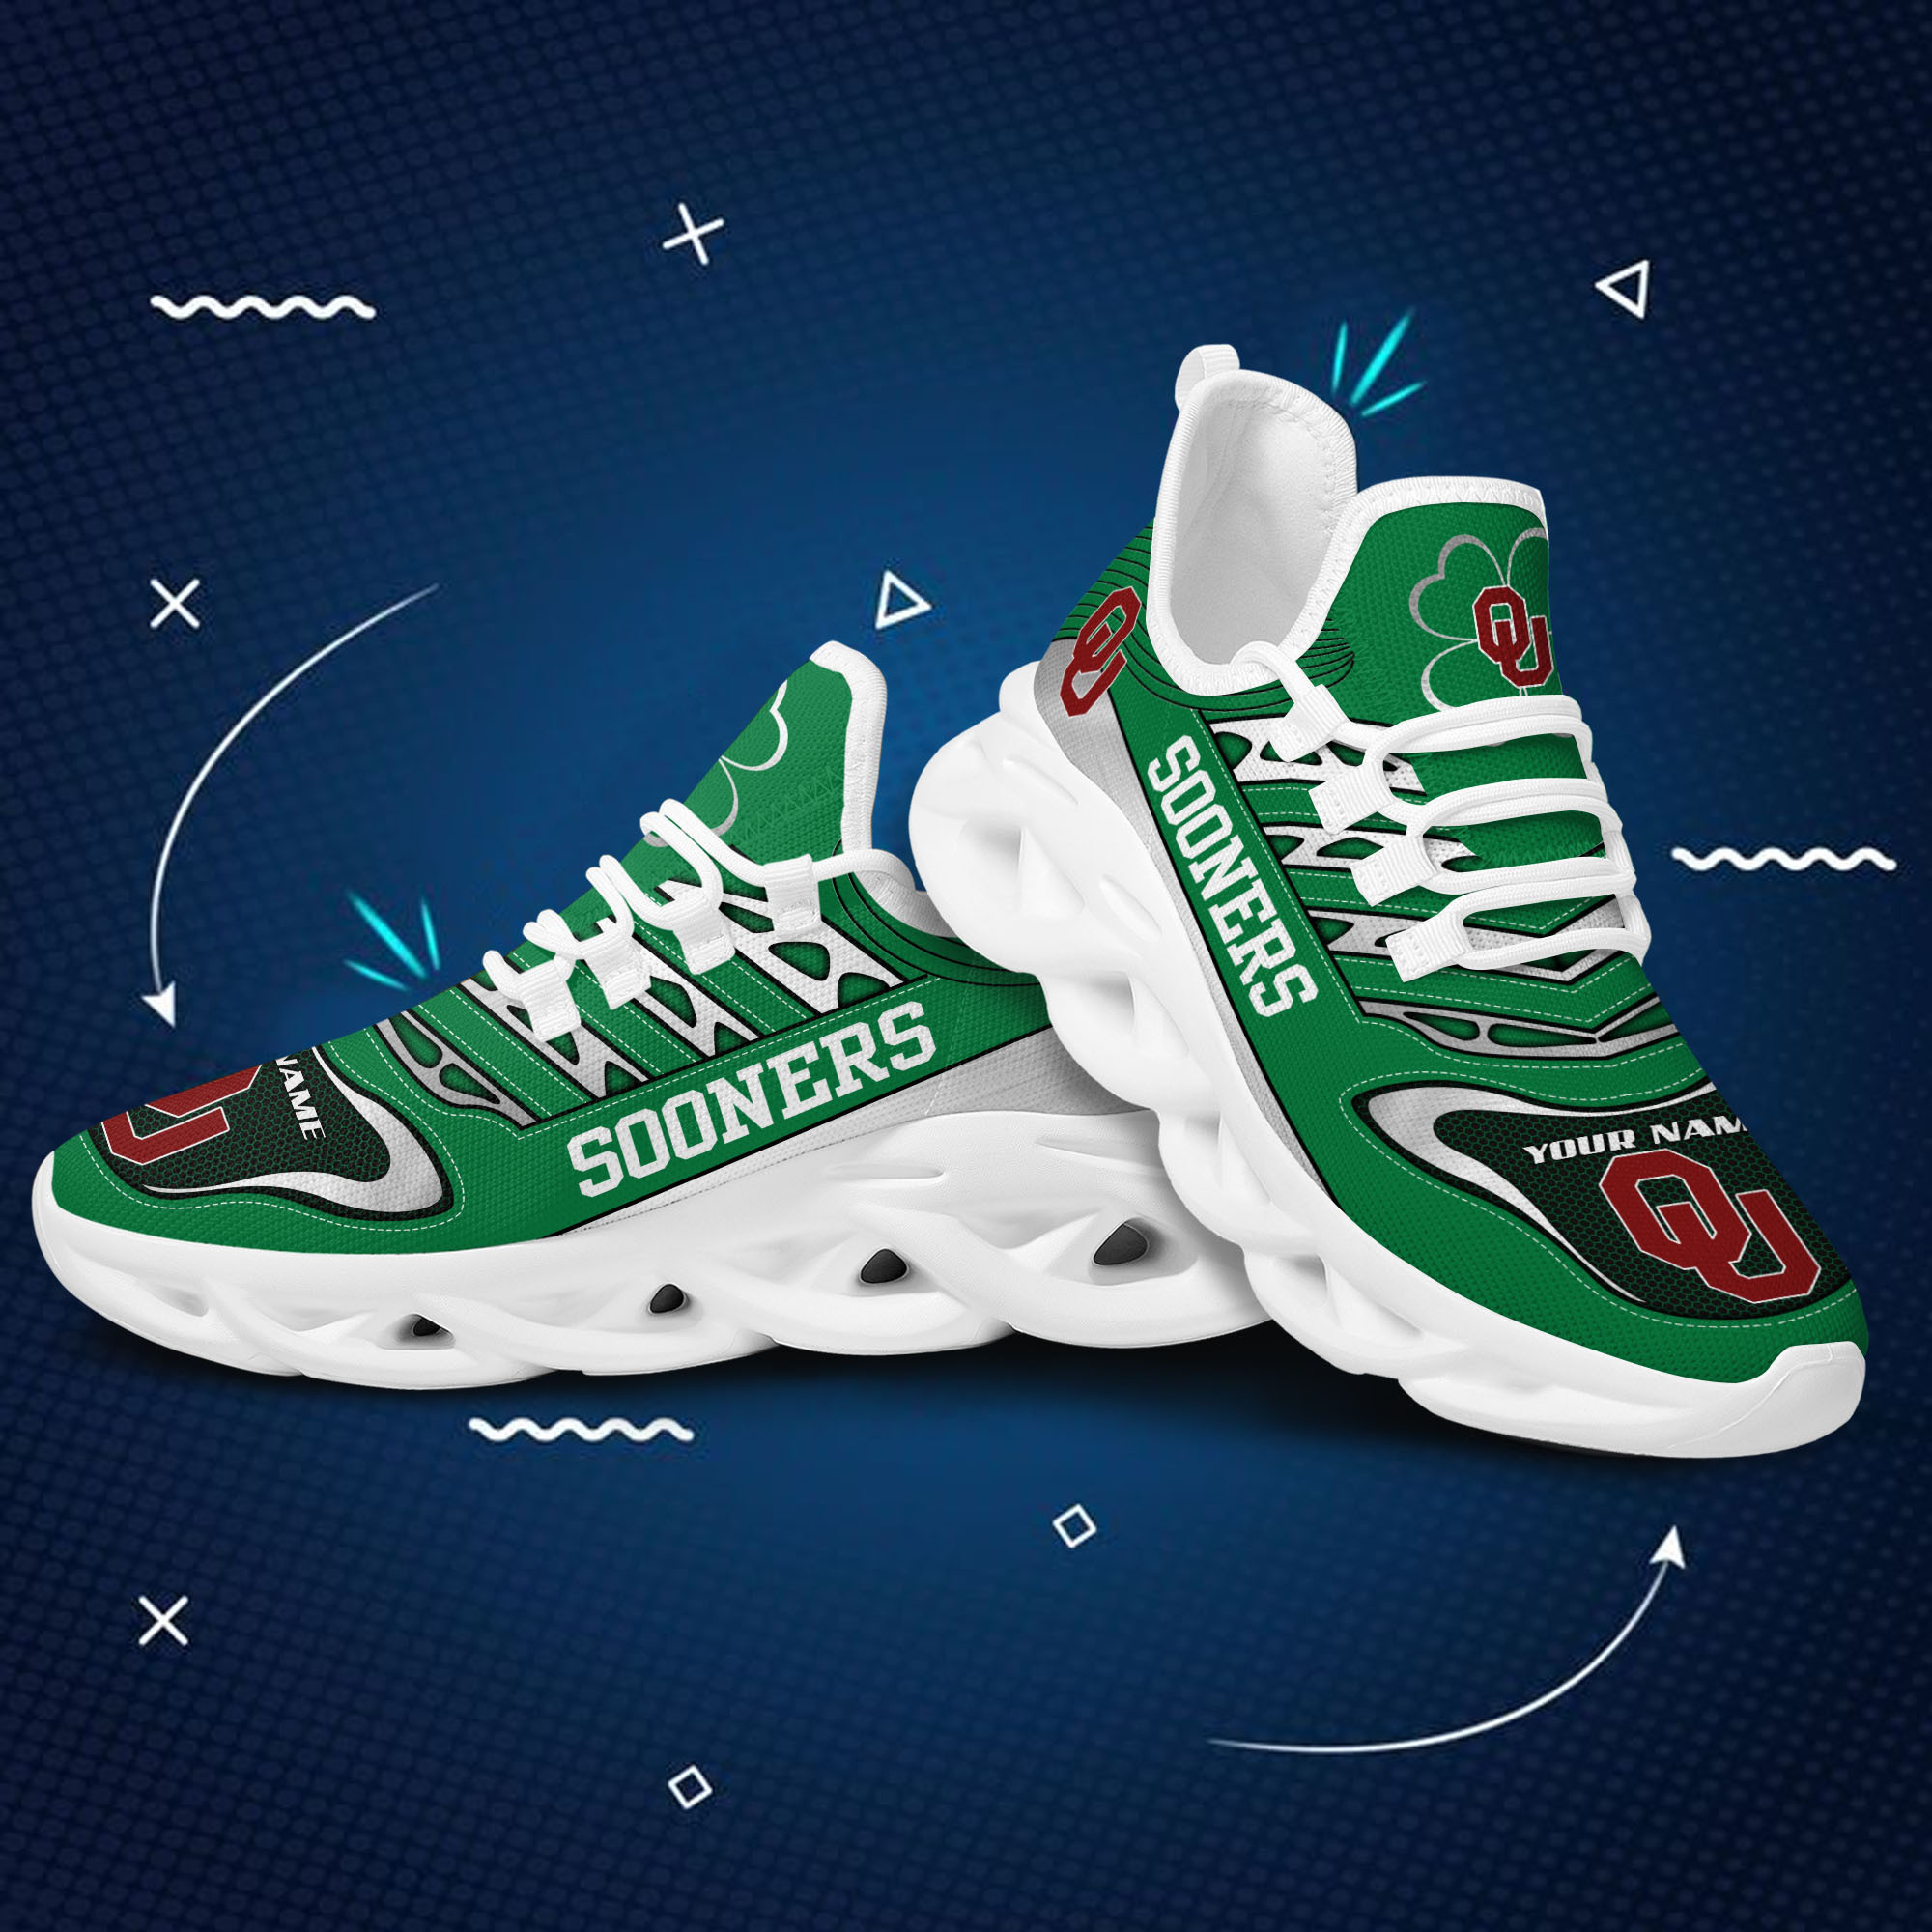 Oklahoma Sooners Ncaa St Patricks Day Shamrock Custom Name Clunky Max Soul Shoes Sneakers For Mens Womens